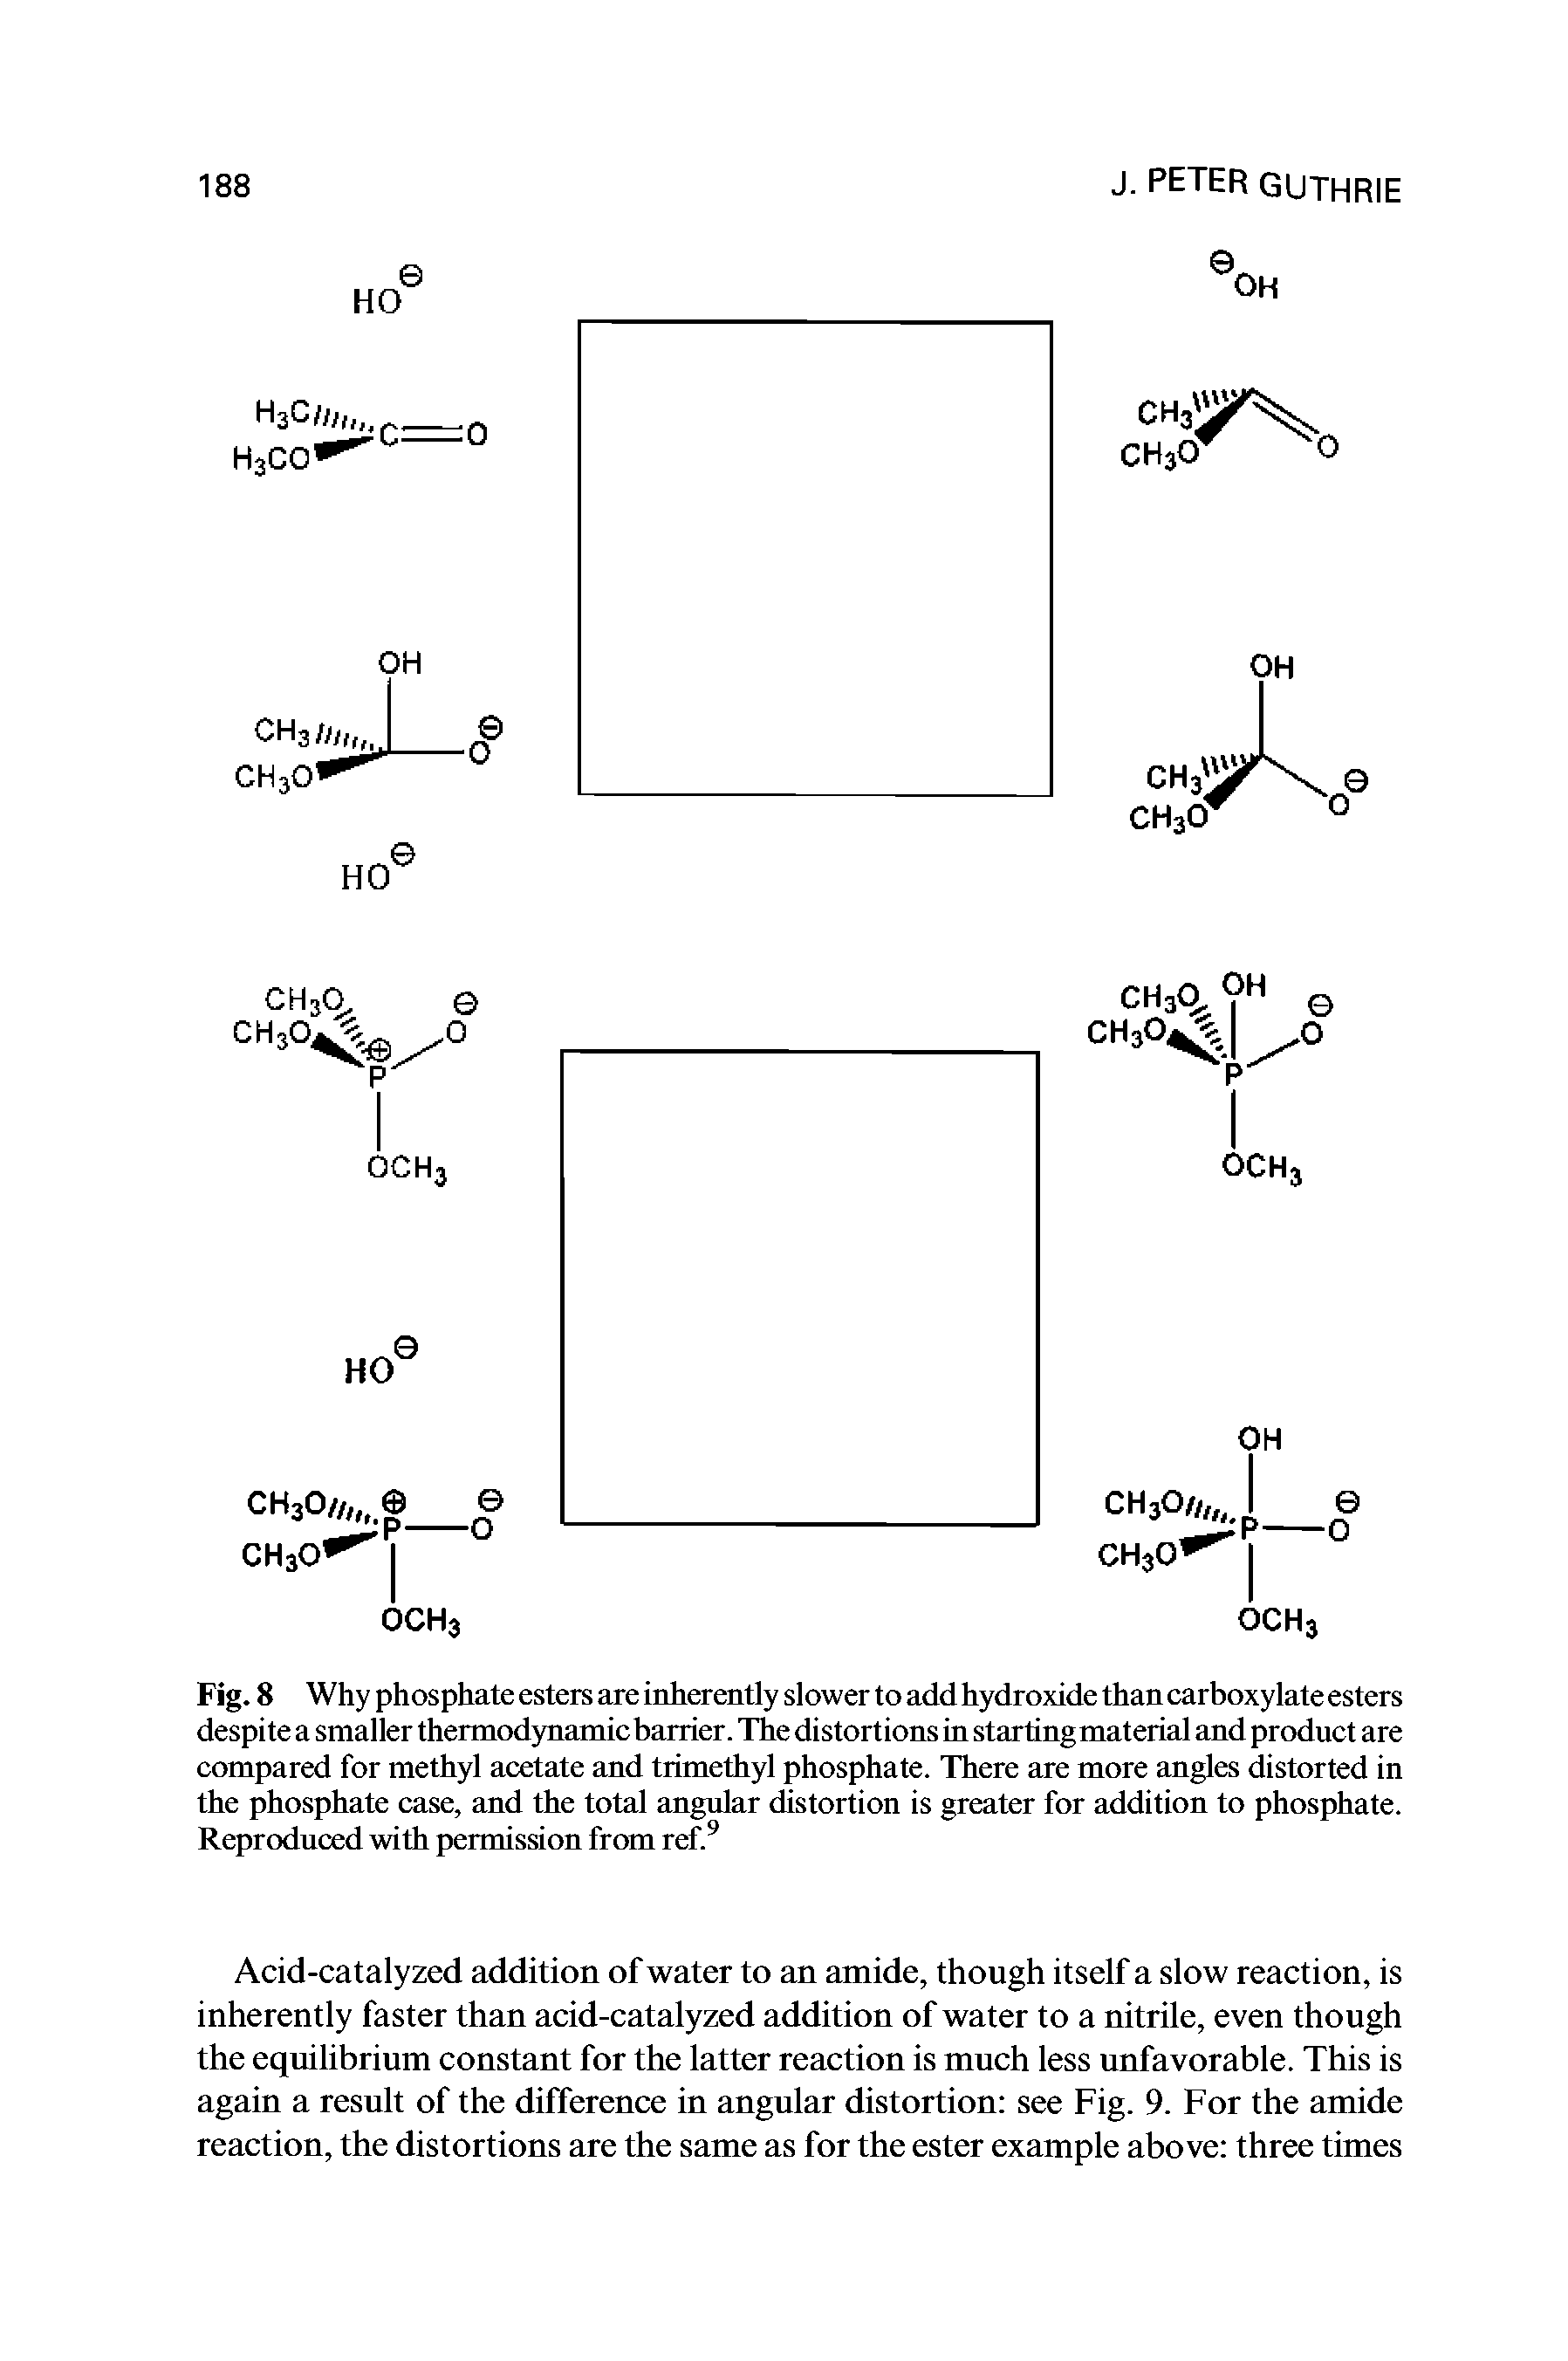 Fig. 8 Why phosphate esters are inherently slower to add hydroxide than carboxylate esters despite a smaller thermodynamic barrier. The distortions in starting material and product are compared for methyl acetate and trimethyl phosphate. There are more angles distorted in the phosphate case, and the total angular distortion is greater for addition to phosphate. Reproduced with permission from ref.9...